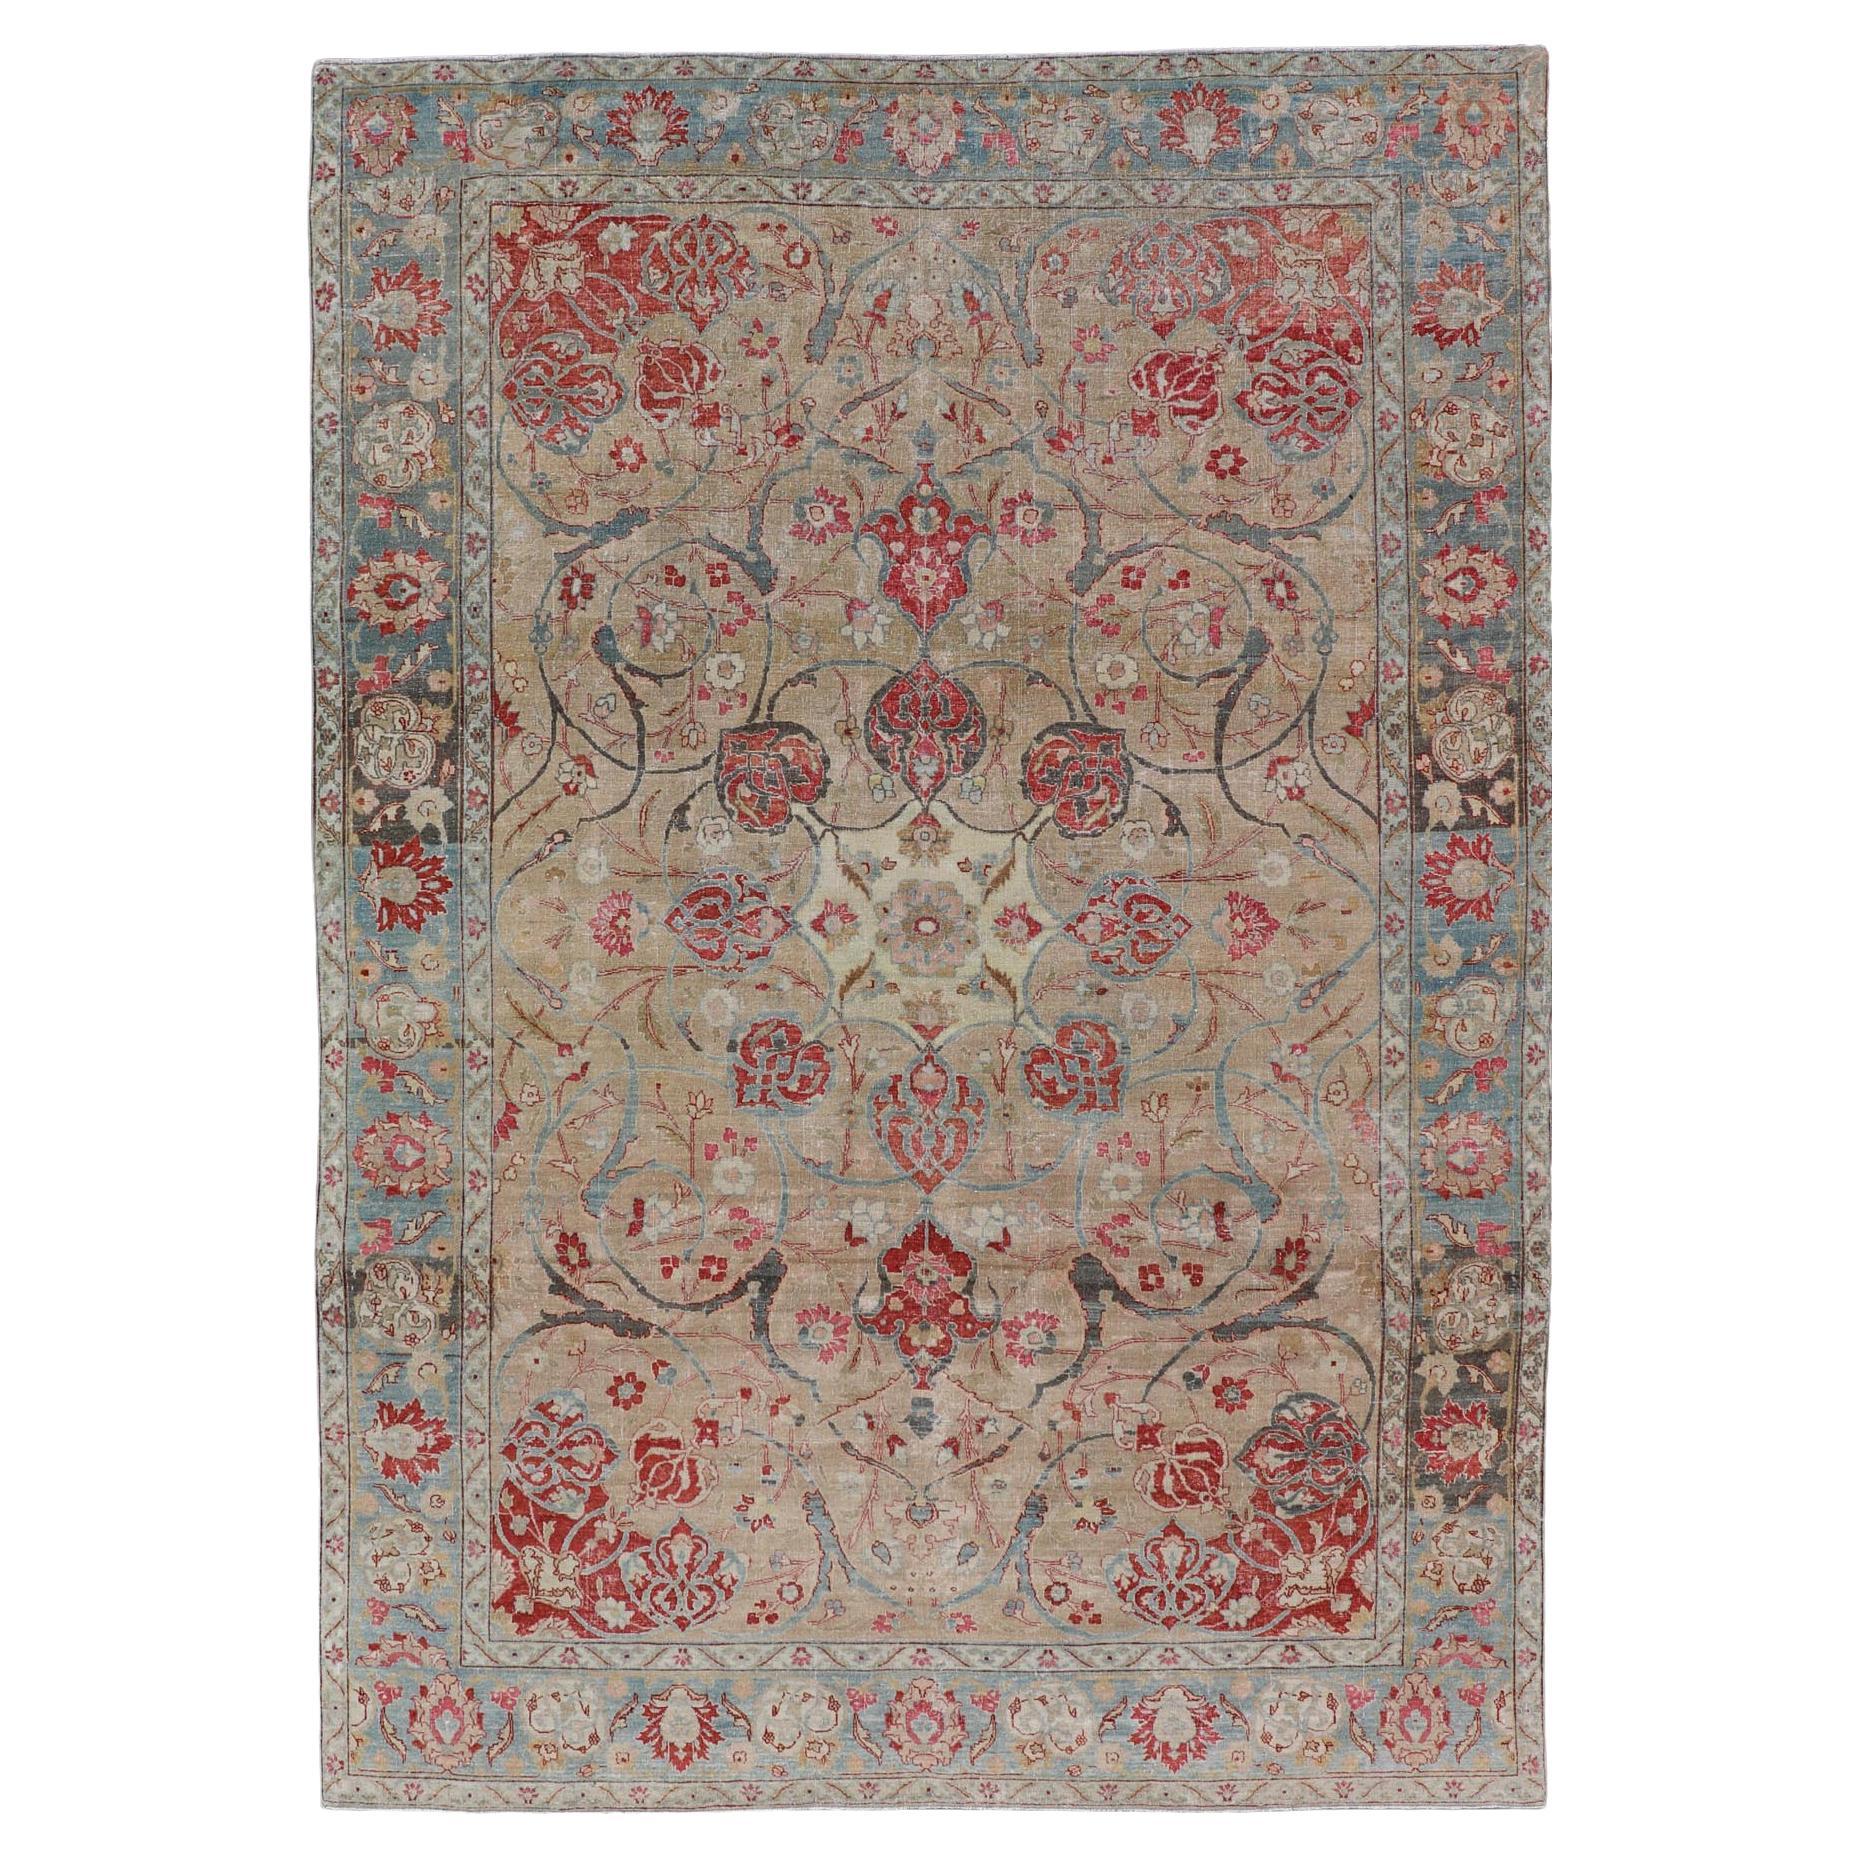 Antique Persian Tabriz Rug with Floral Medallion Design in Tan, Red, and Blue